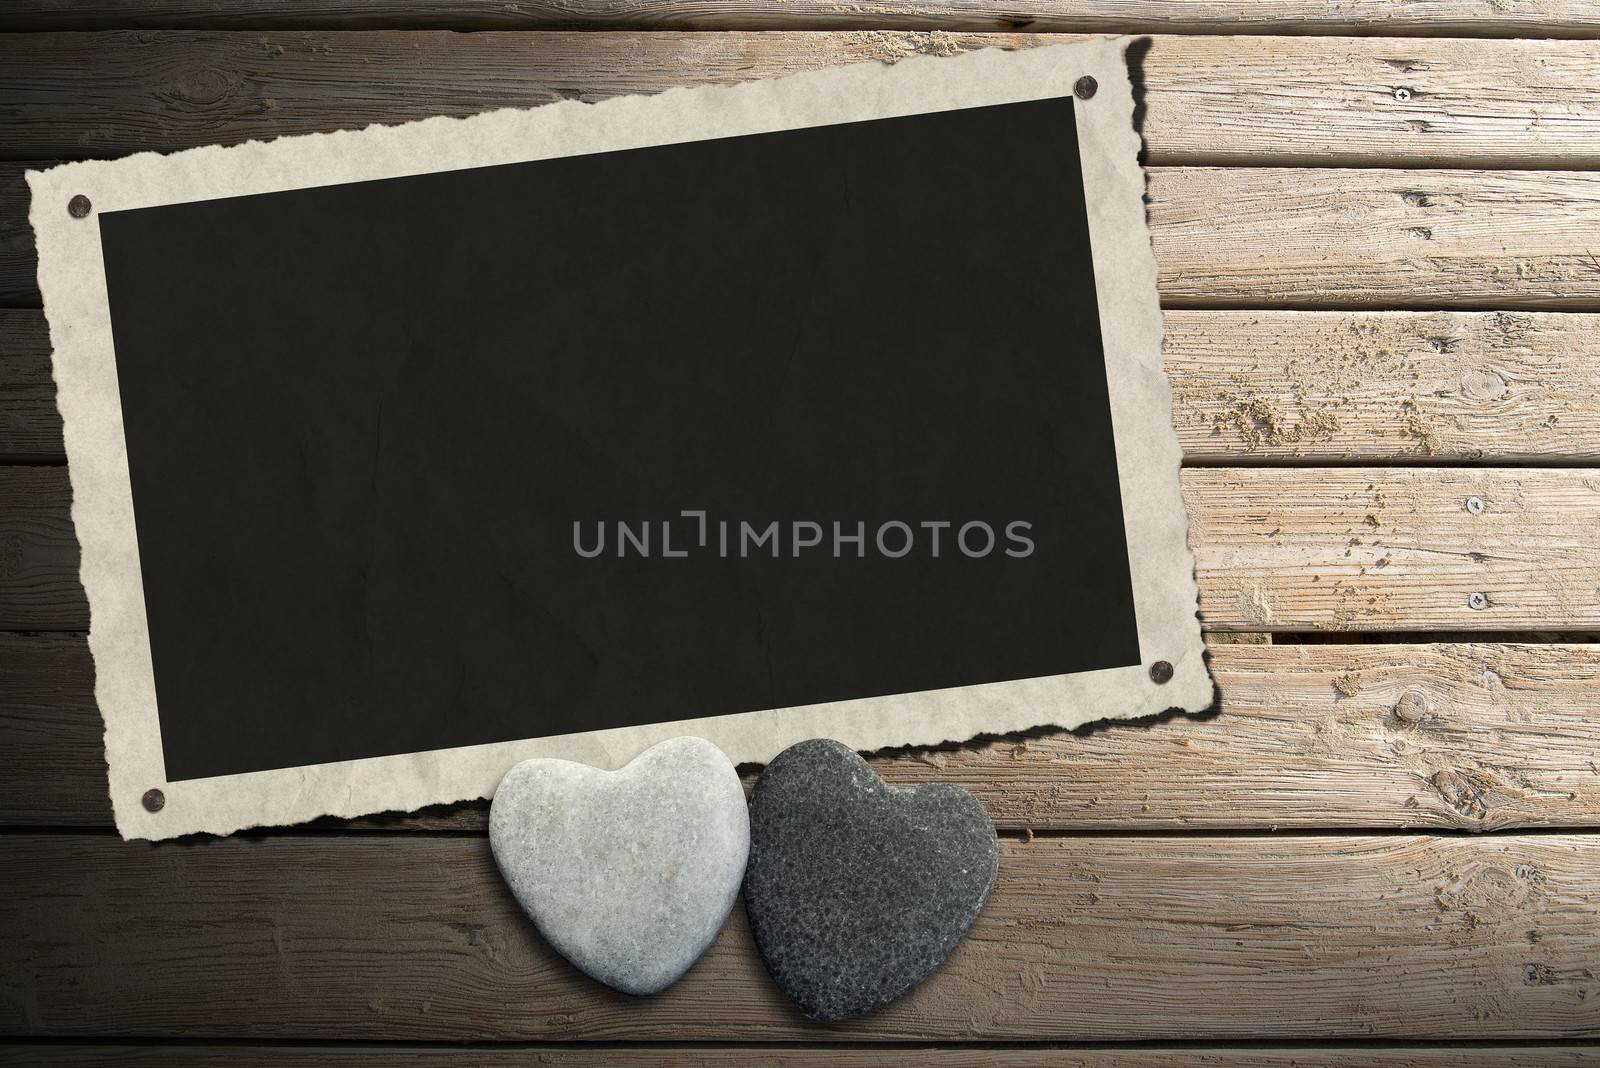 Aged and romantic photo frame with two stone hearts on wooden floor with sand